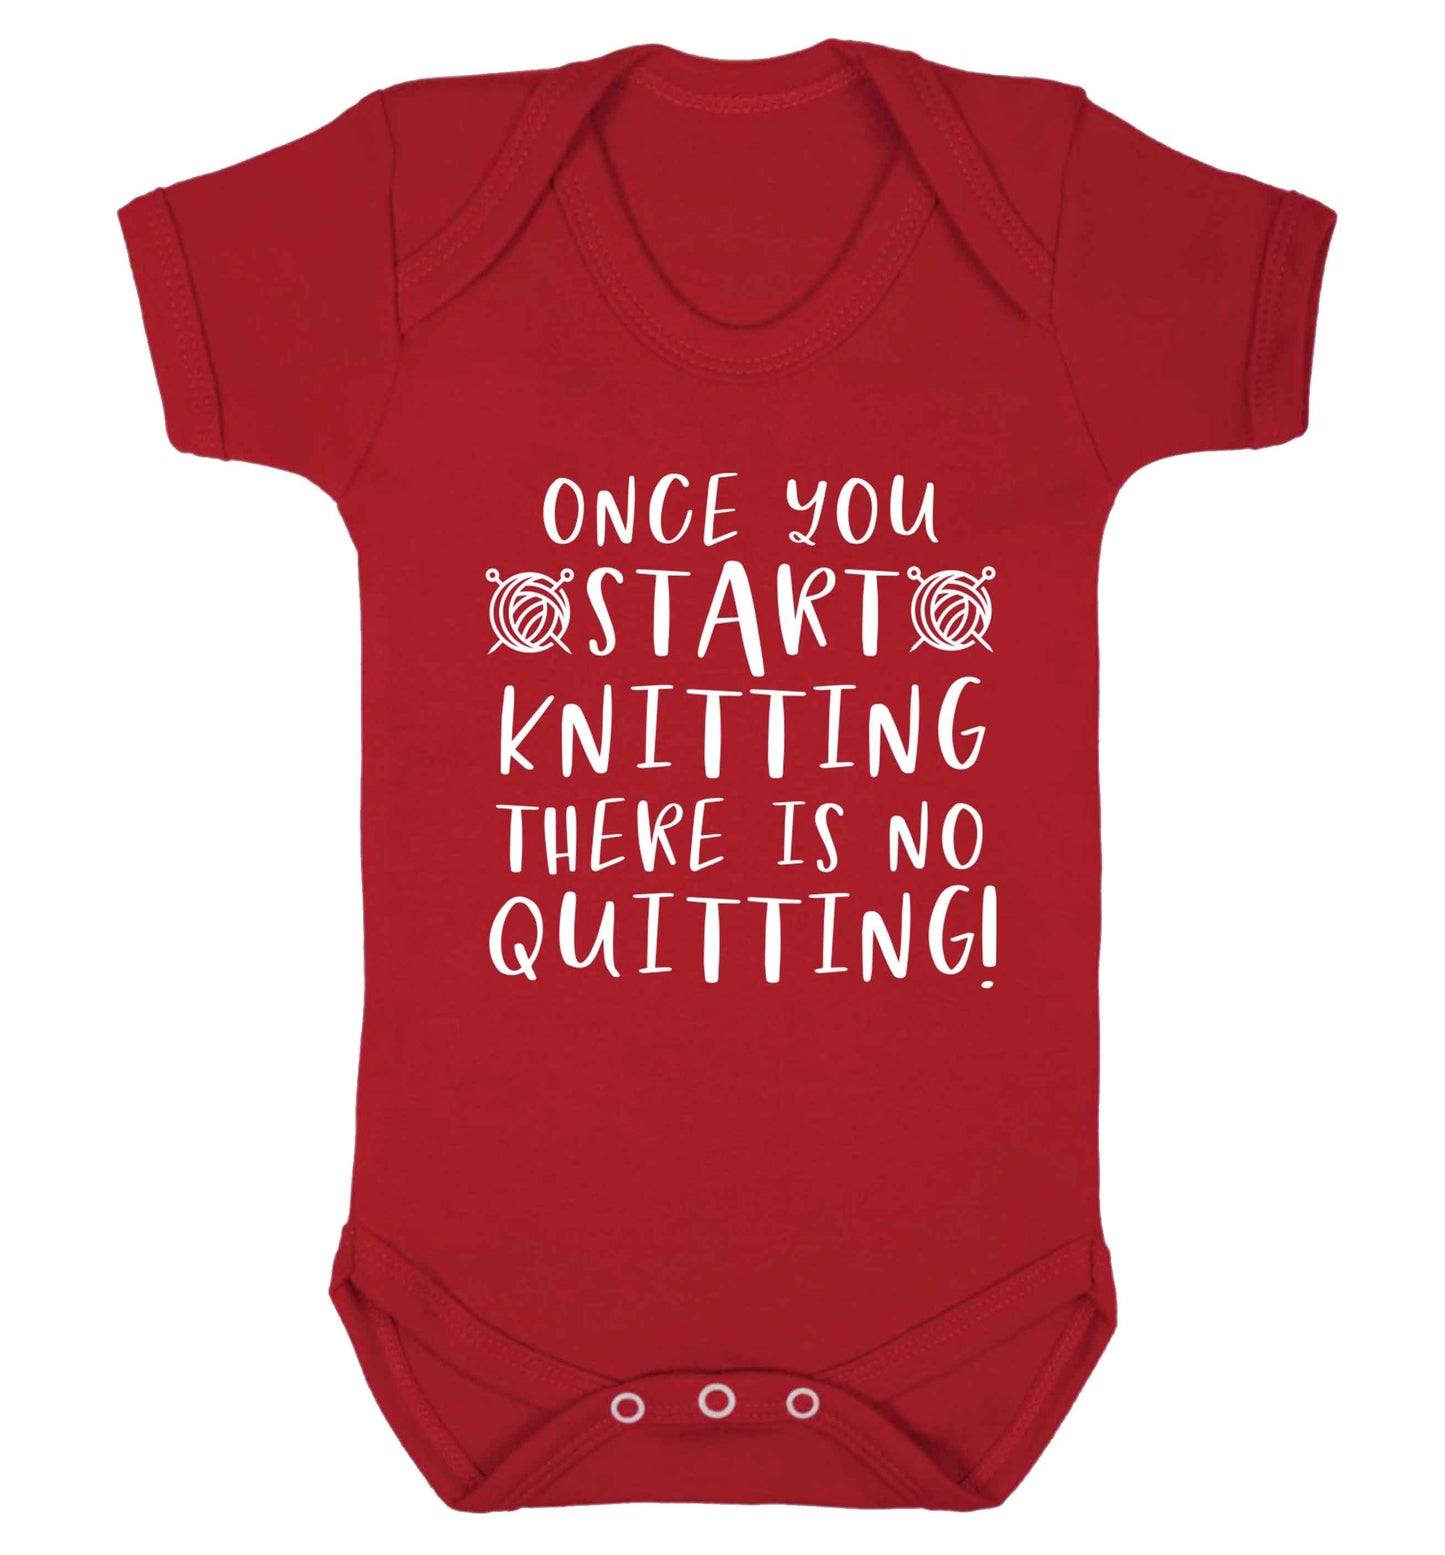 Once you start knitting there is no quitting! Baby Vest red 18-24 months